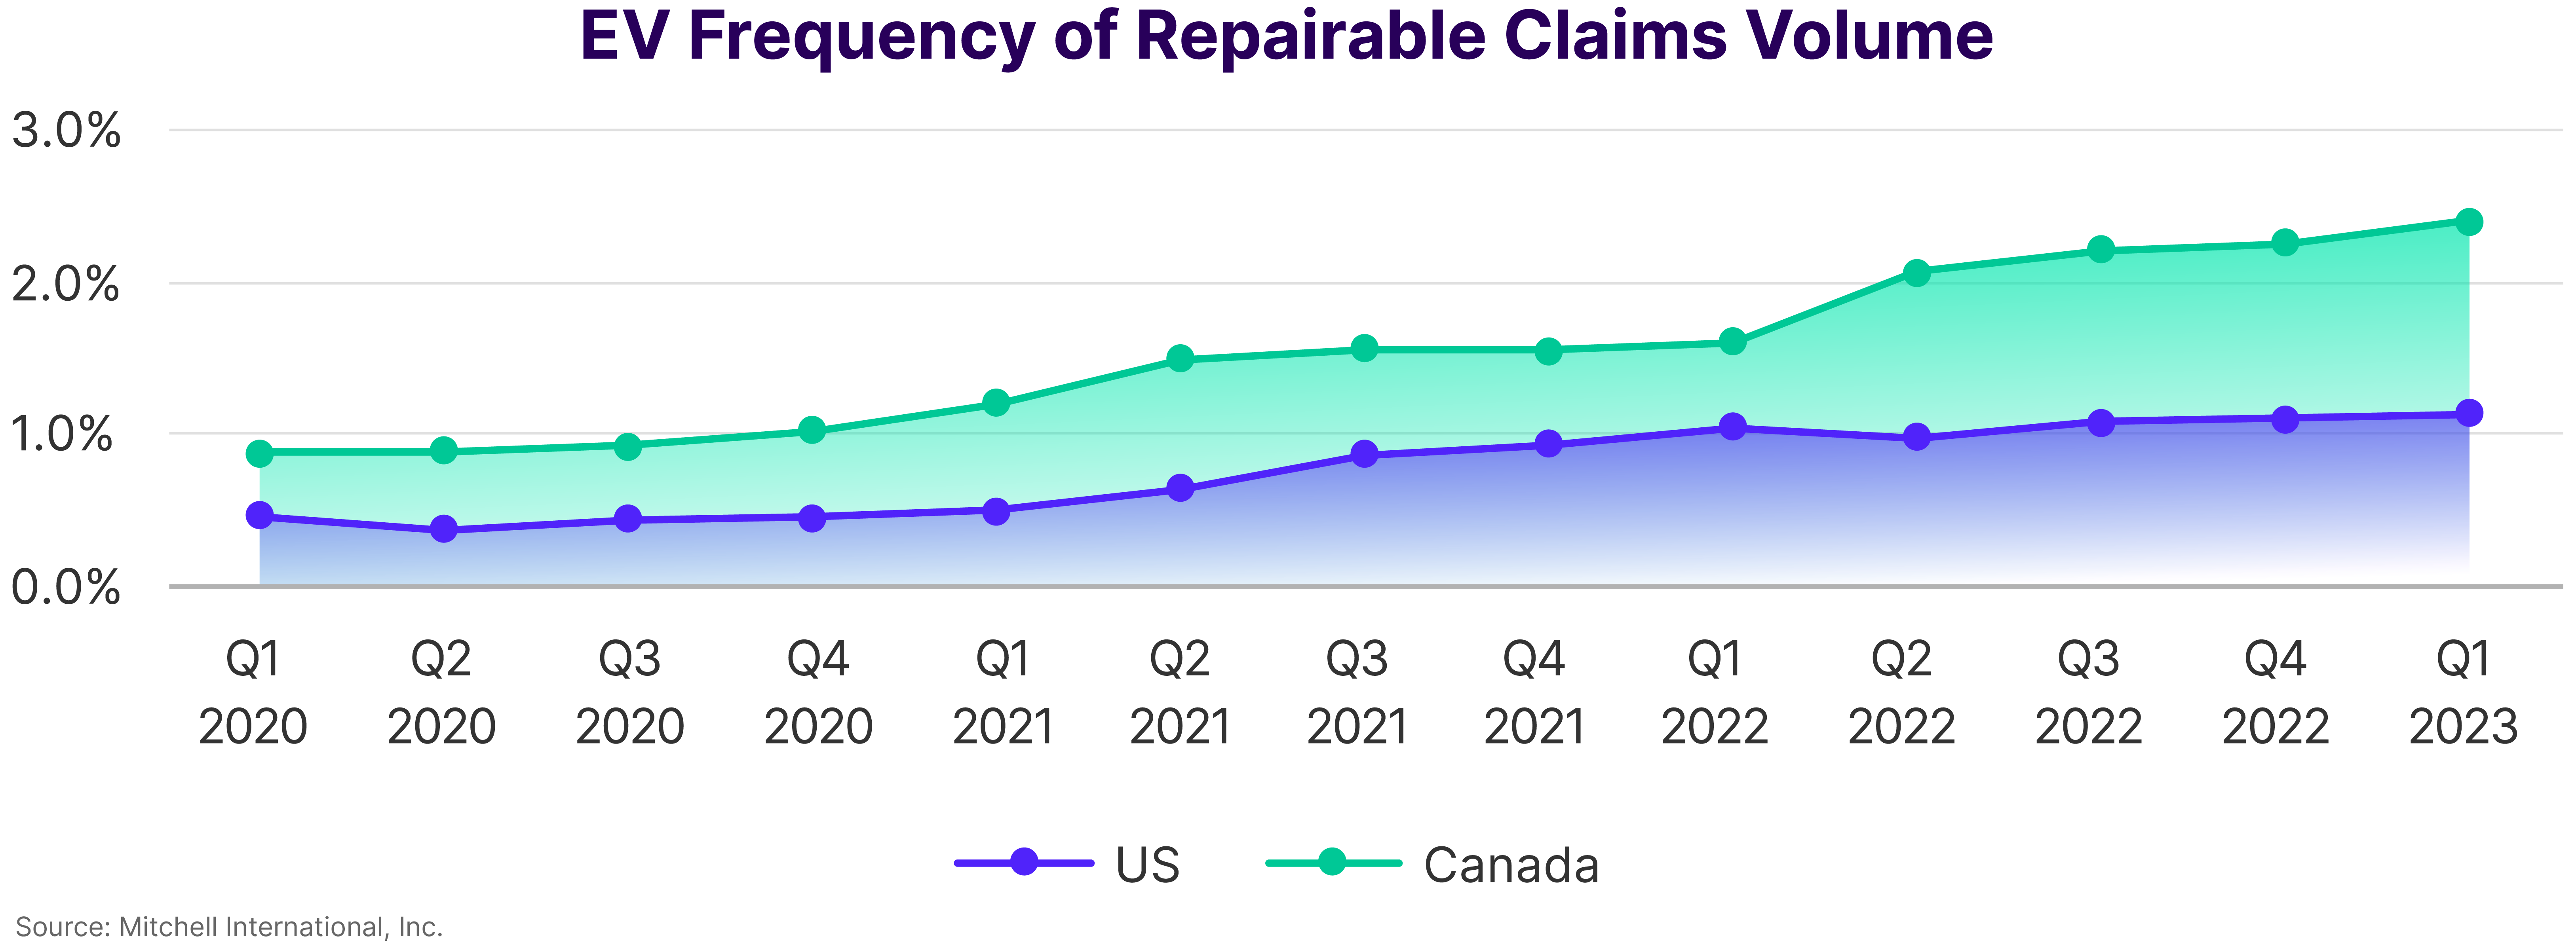 EV Frequency of Repairable Claims Volume Q1 2023